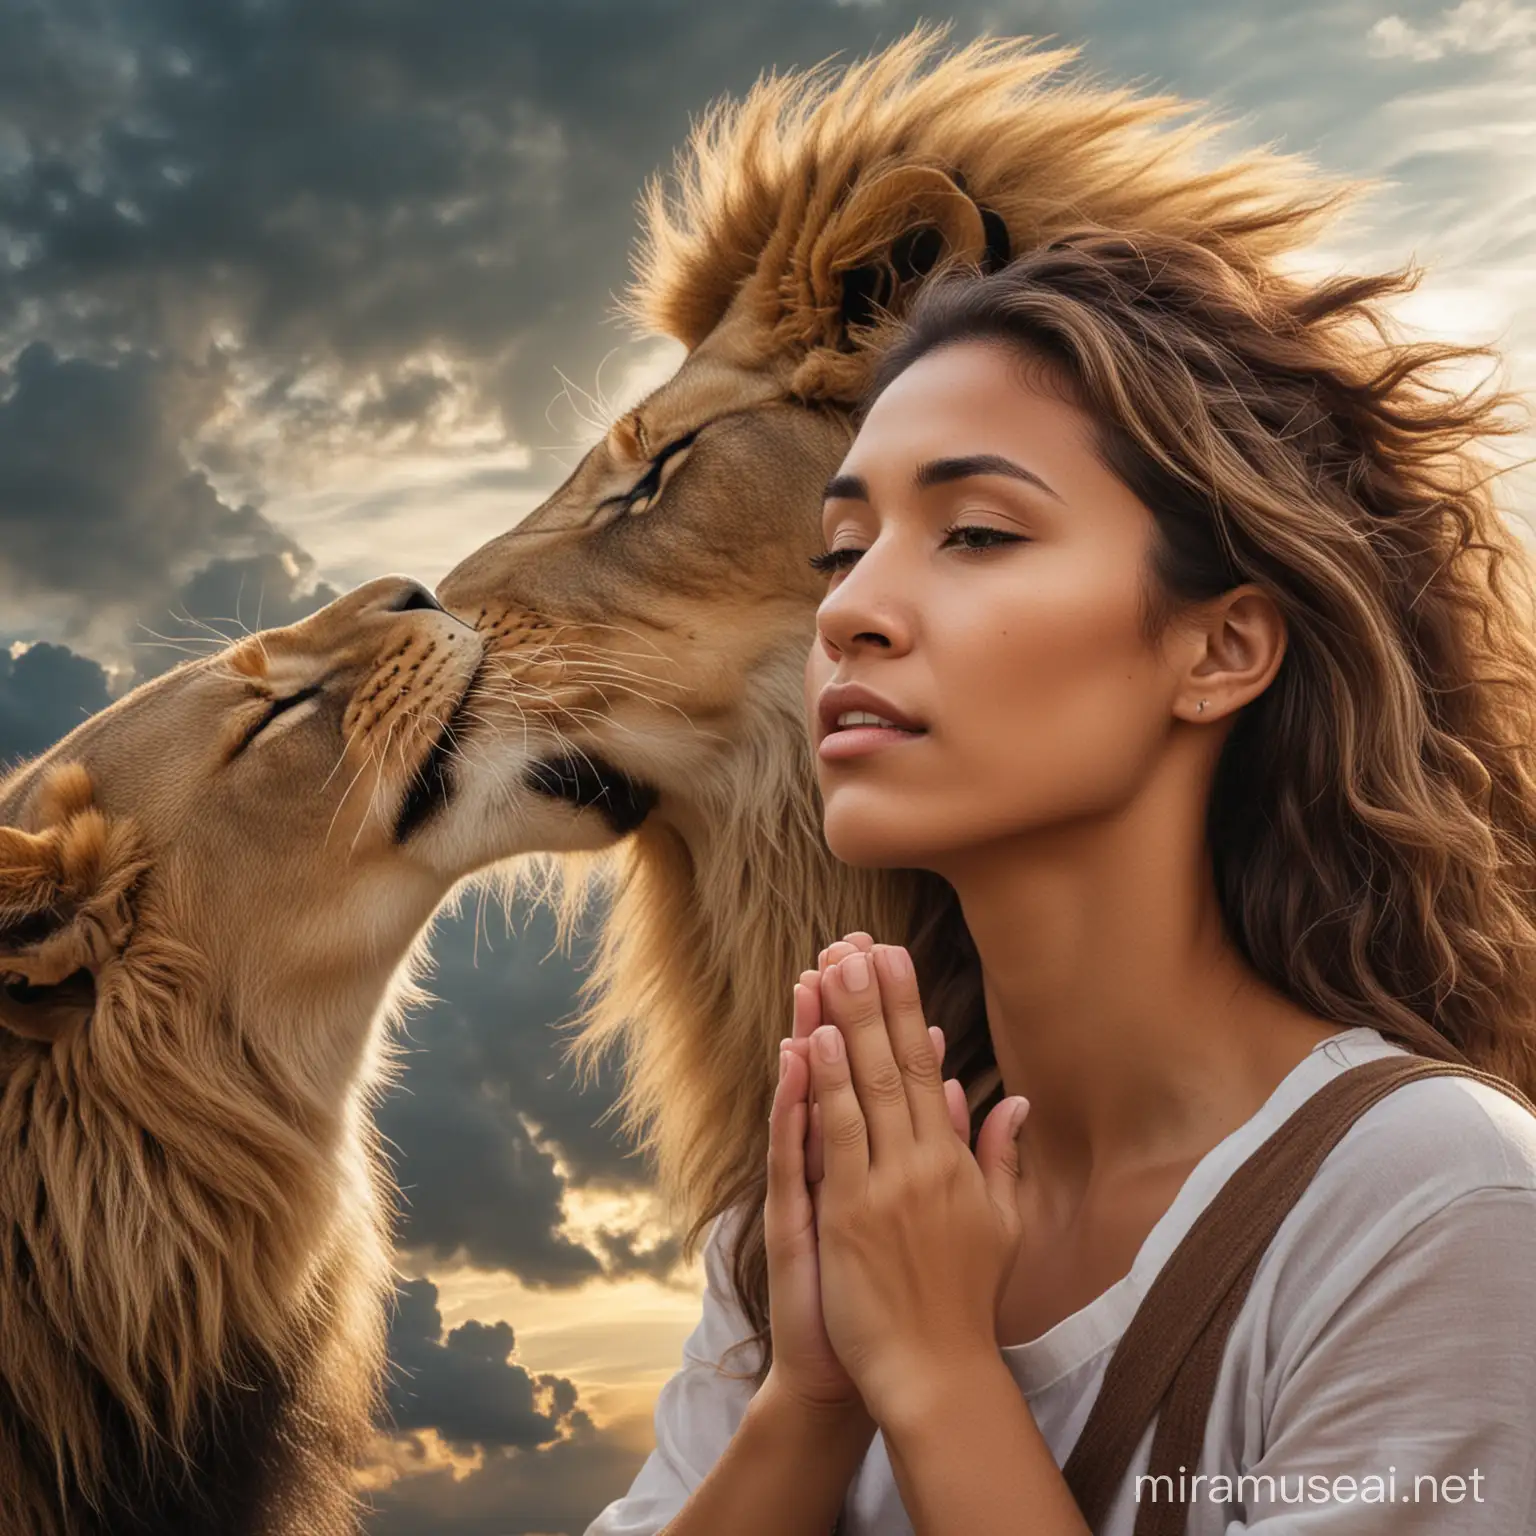 Multiethnic Woman Praying with Lion